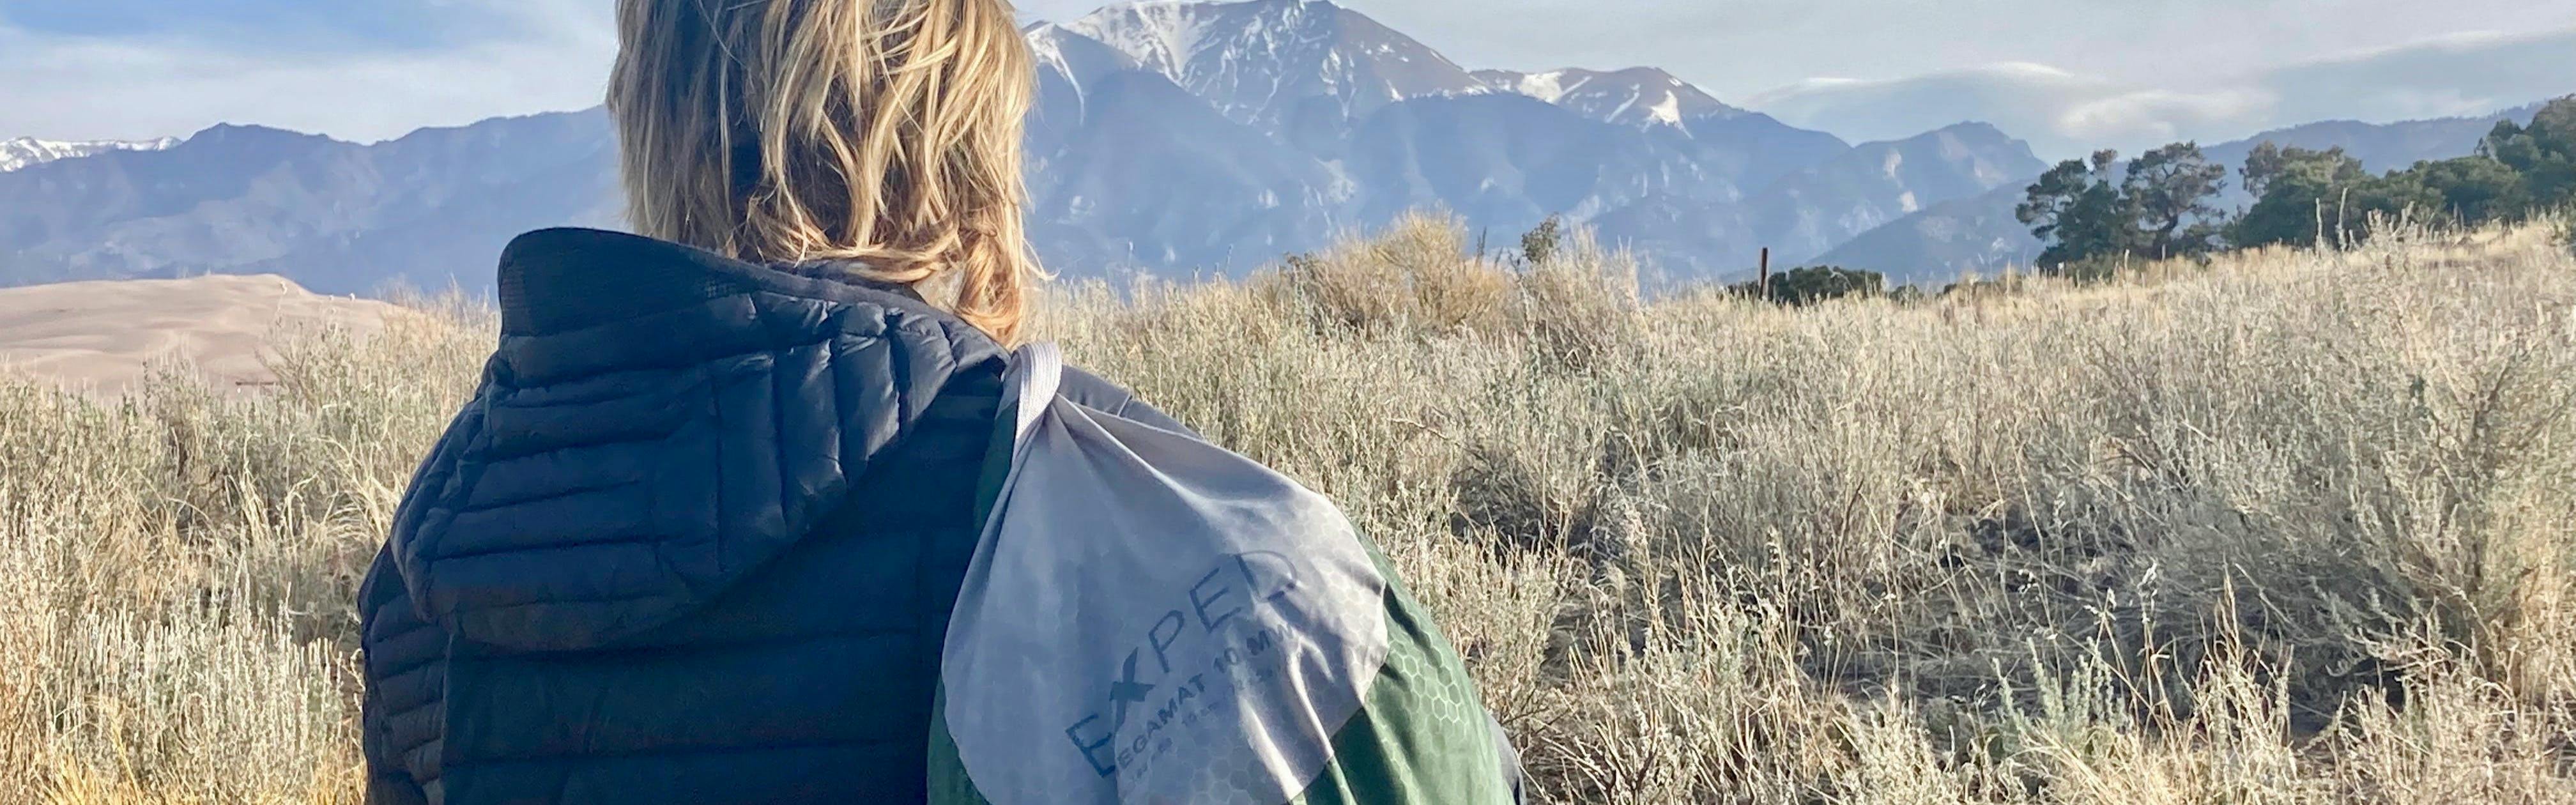 A person holds the Exped sleeping mad in its stuff sack. There are mountains in the background.